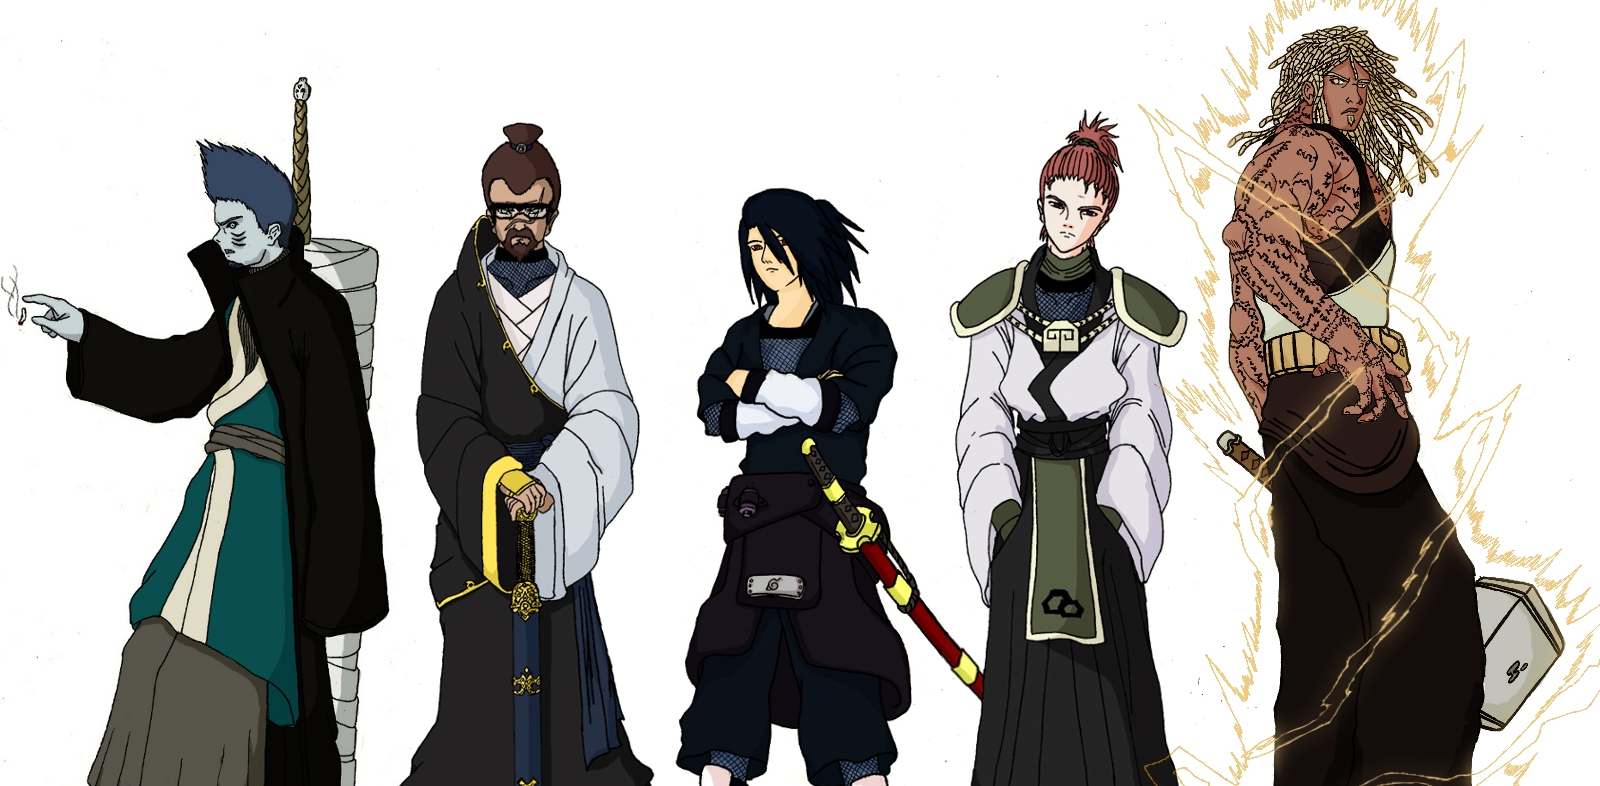 The Five Kage Naruto Mobile game. by Bbyblackcat on DeviantArt